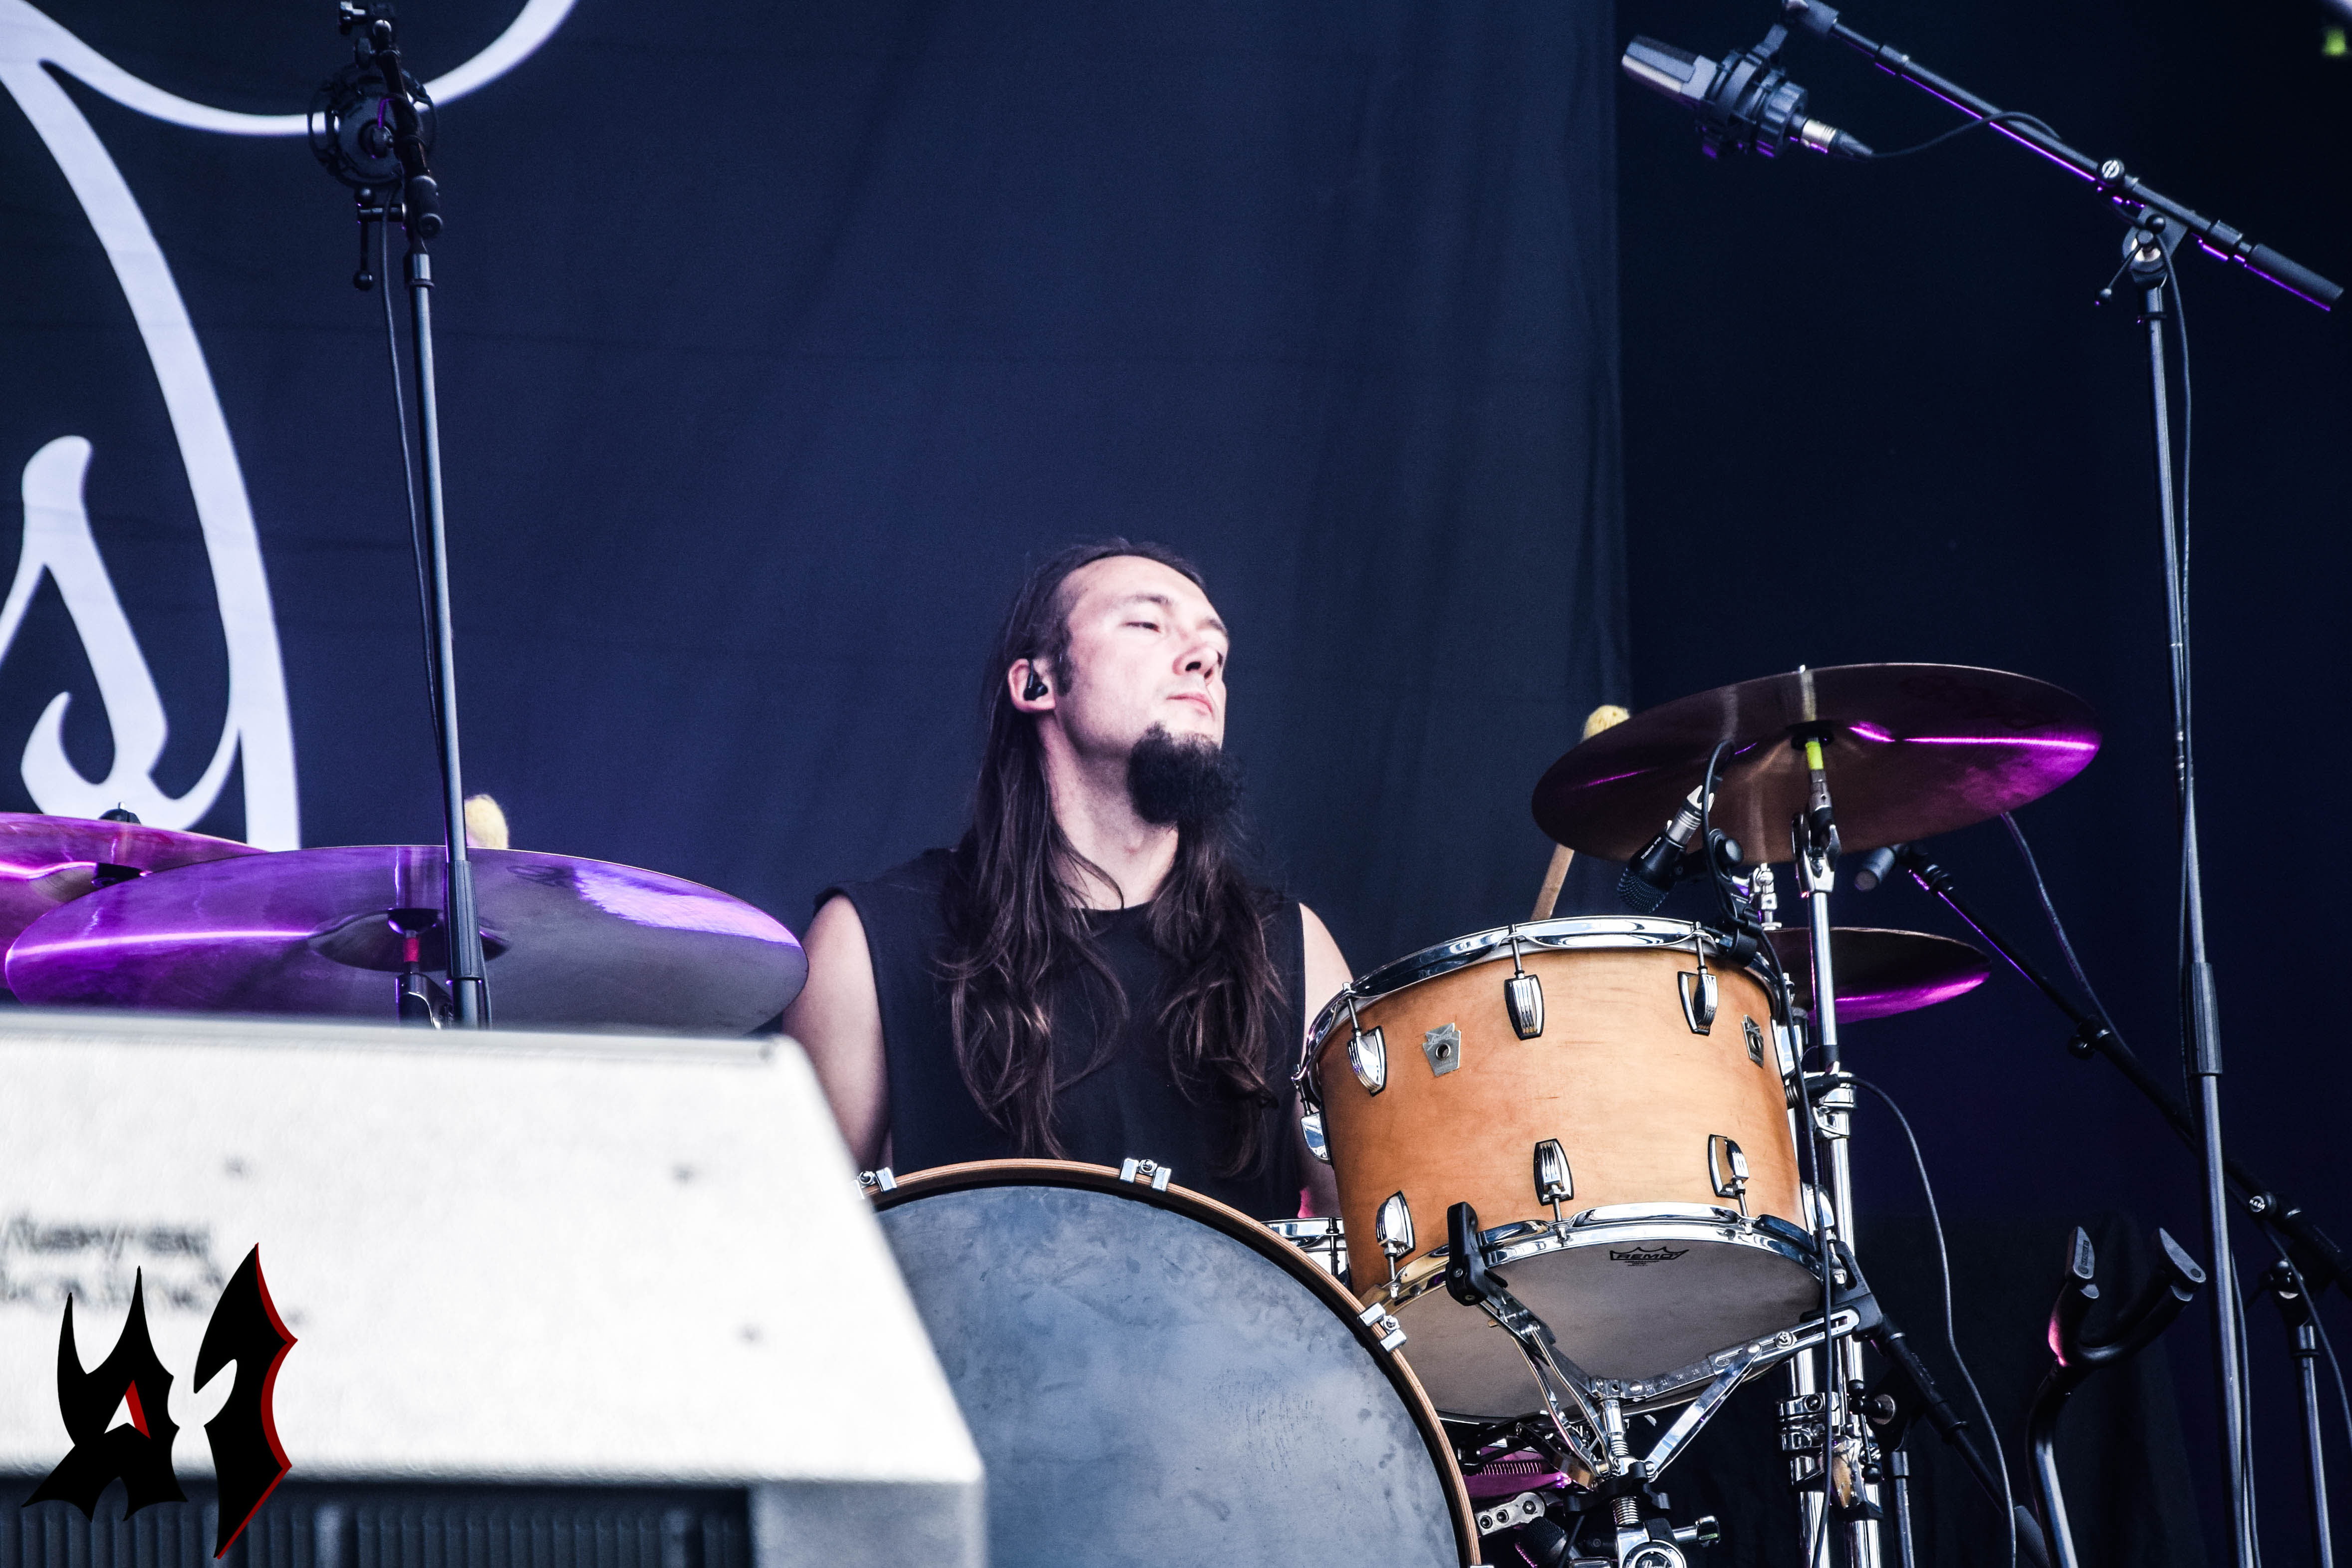 Donwload 2018 – Day 2 - Alcest 13